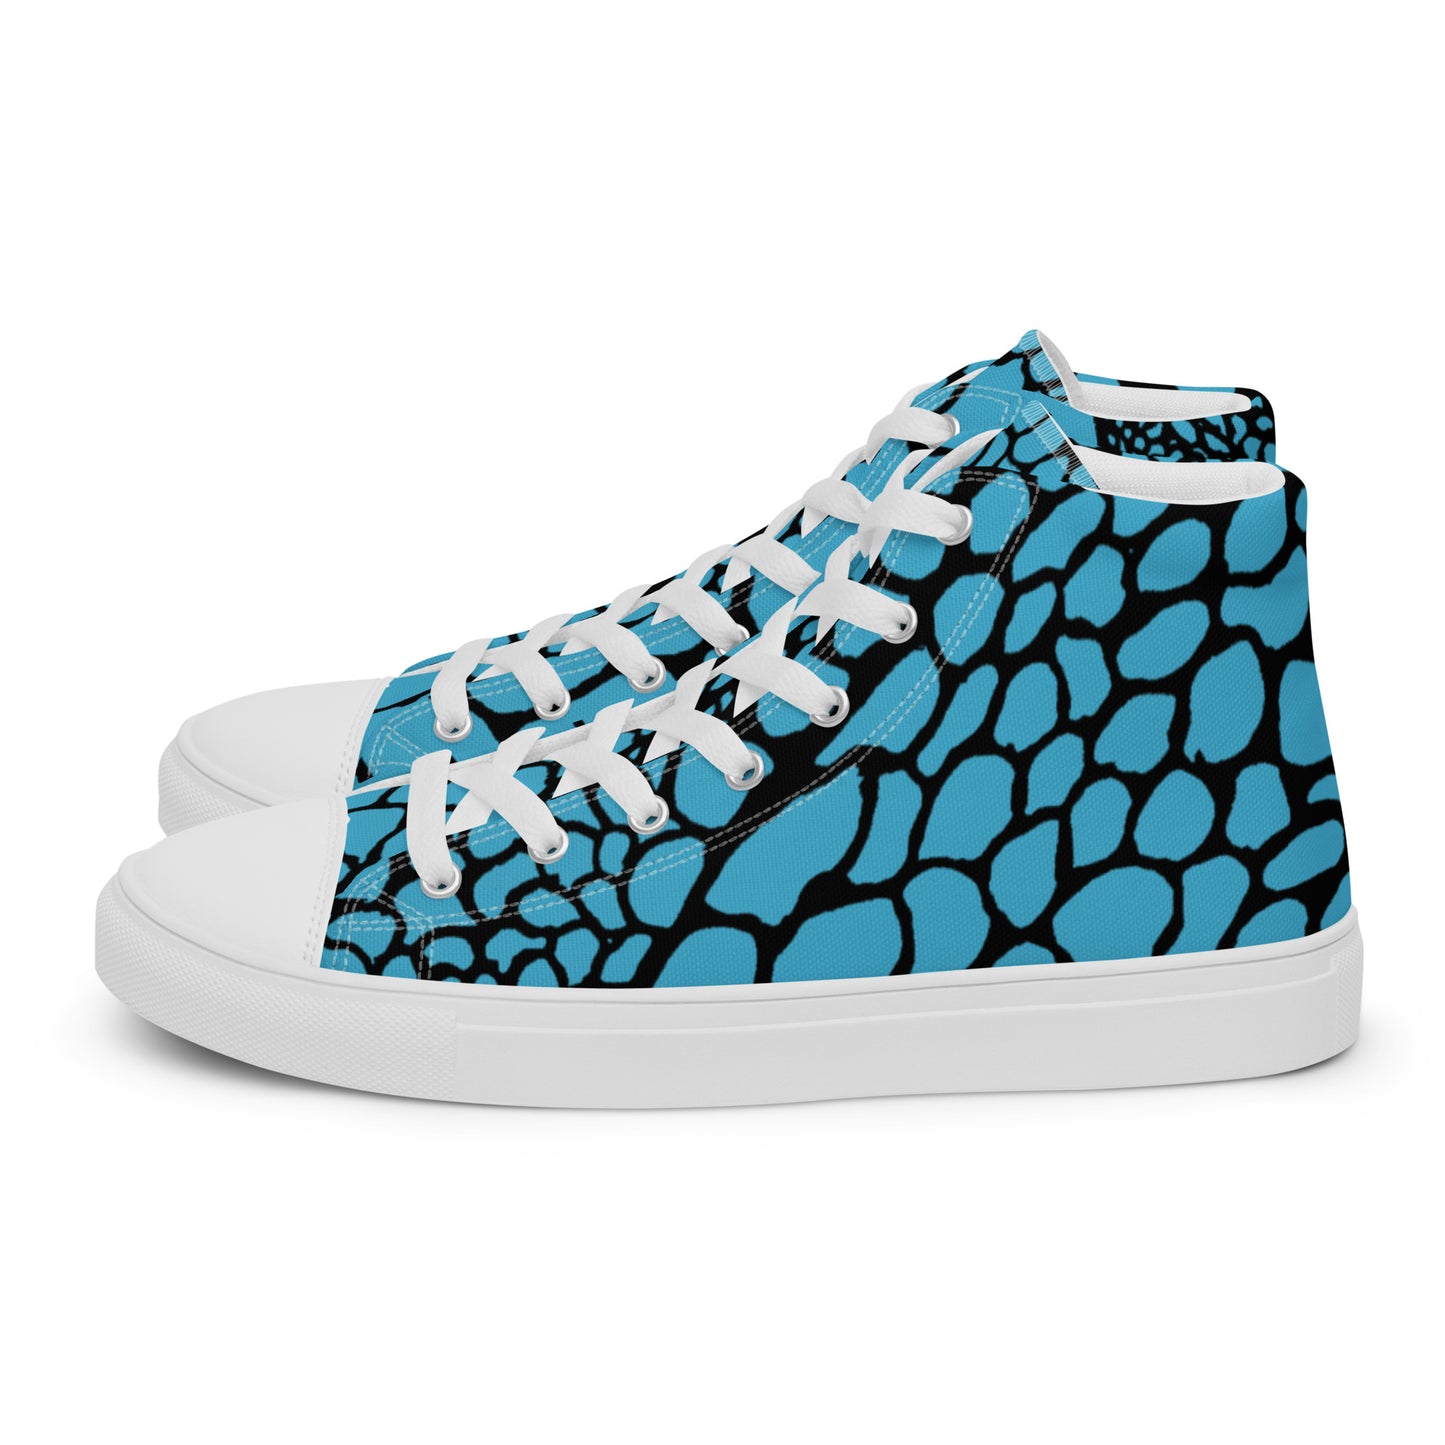 Organic Sky Blue Men’s High Top Canvas Shoes | Casual Print Shoes | Stylish Festival Sneakers | Abstract Shoes | Lace Up Sneakers | - Comfortable Culture - Shoes - Comfortable Culture